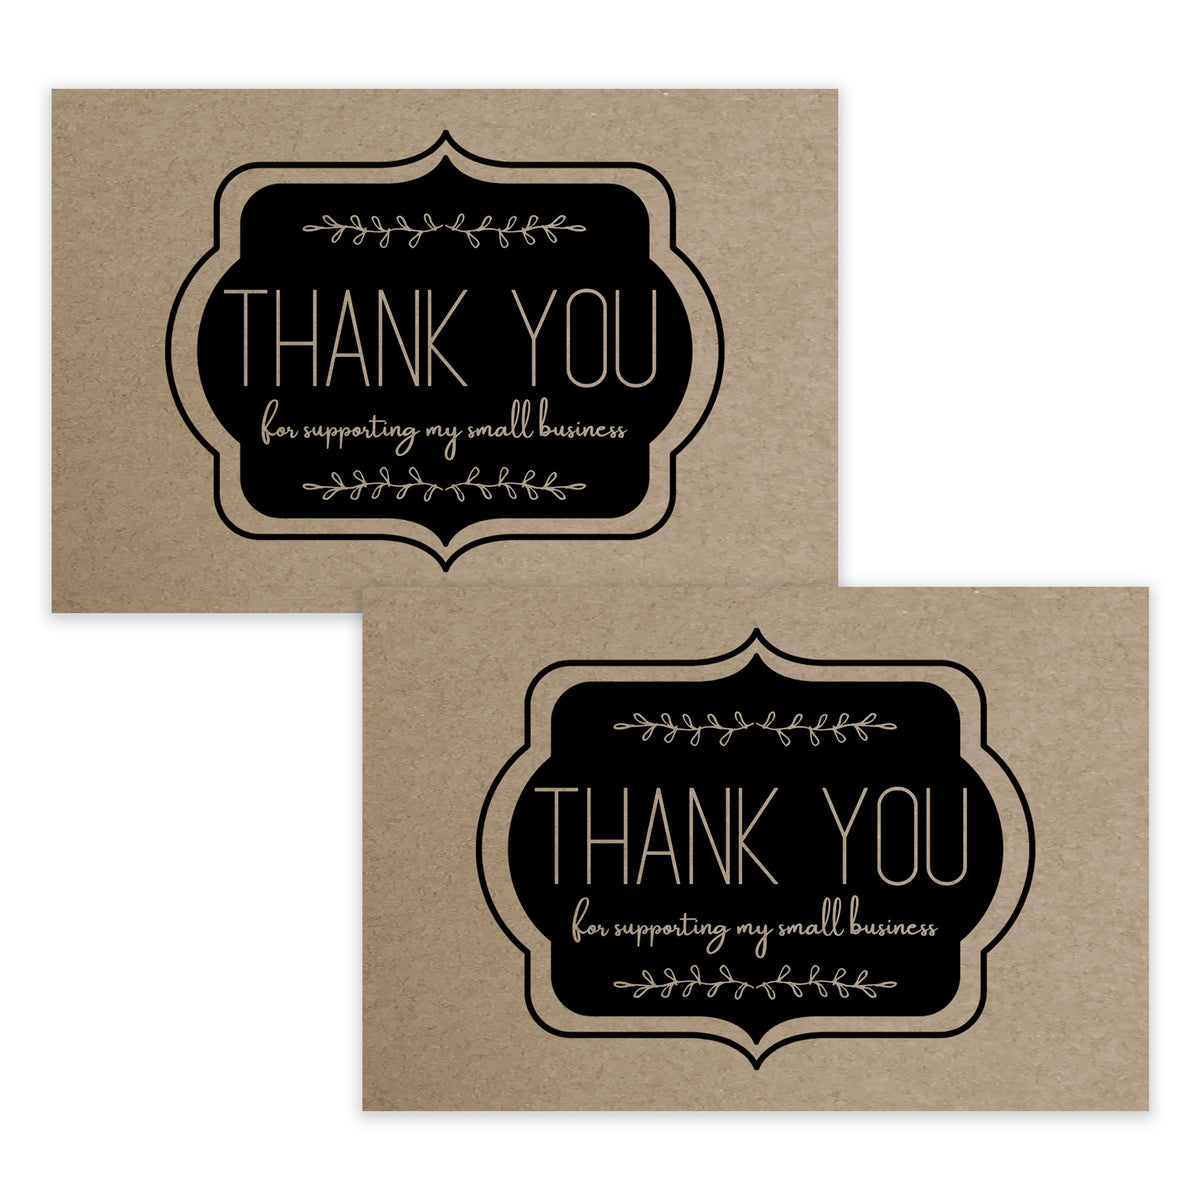 Pre-Printed KRAFT Thank you Cards on 4x6 Discount Card Stock - 50 pack